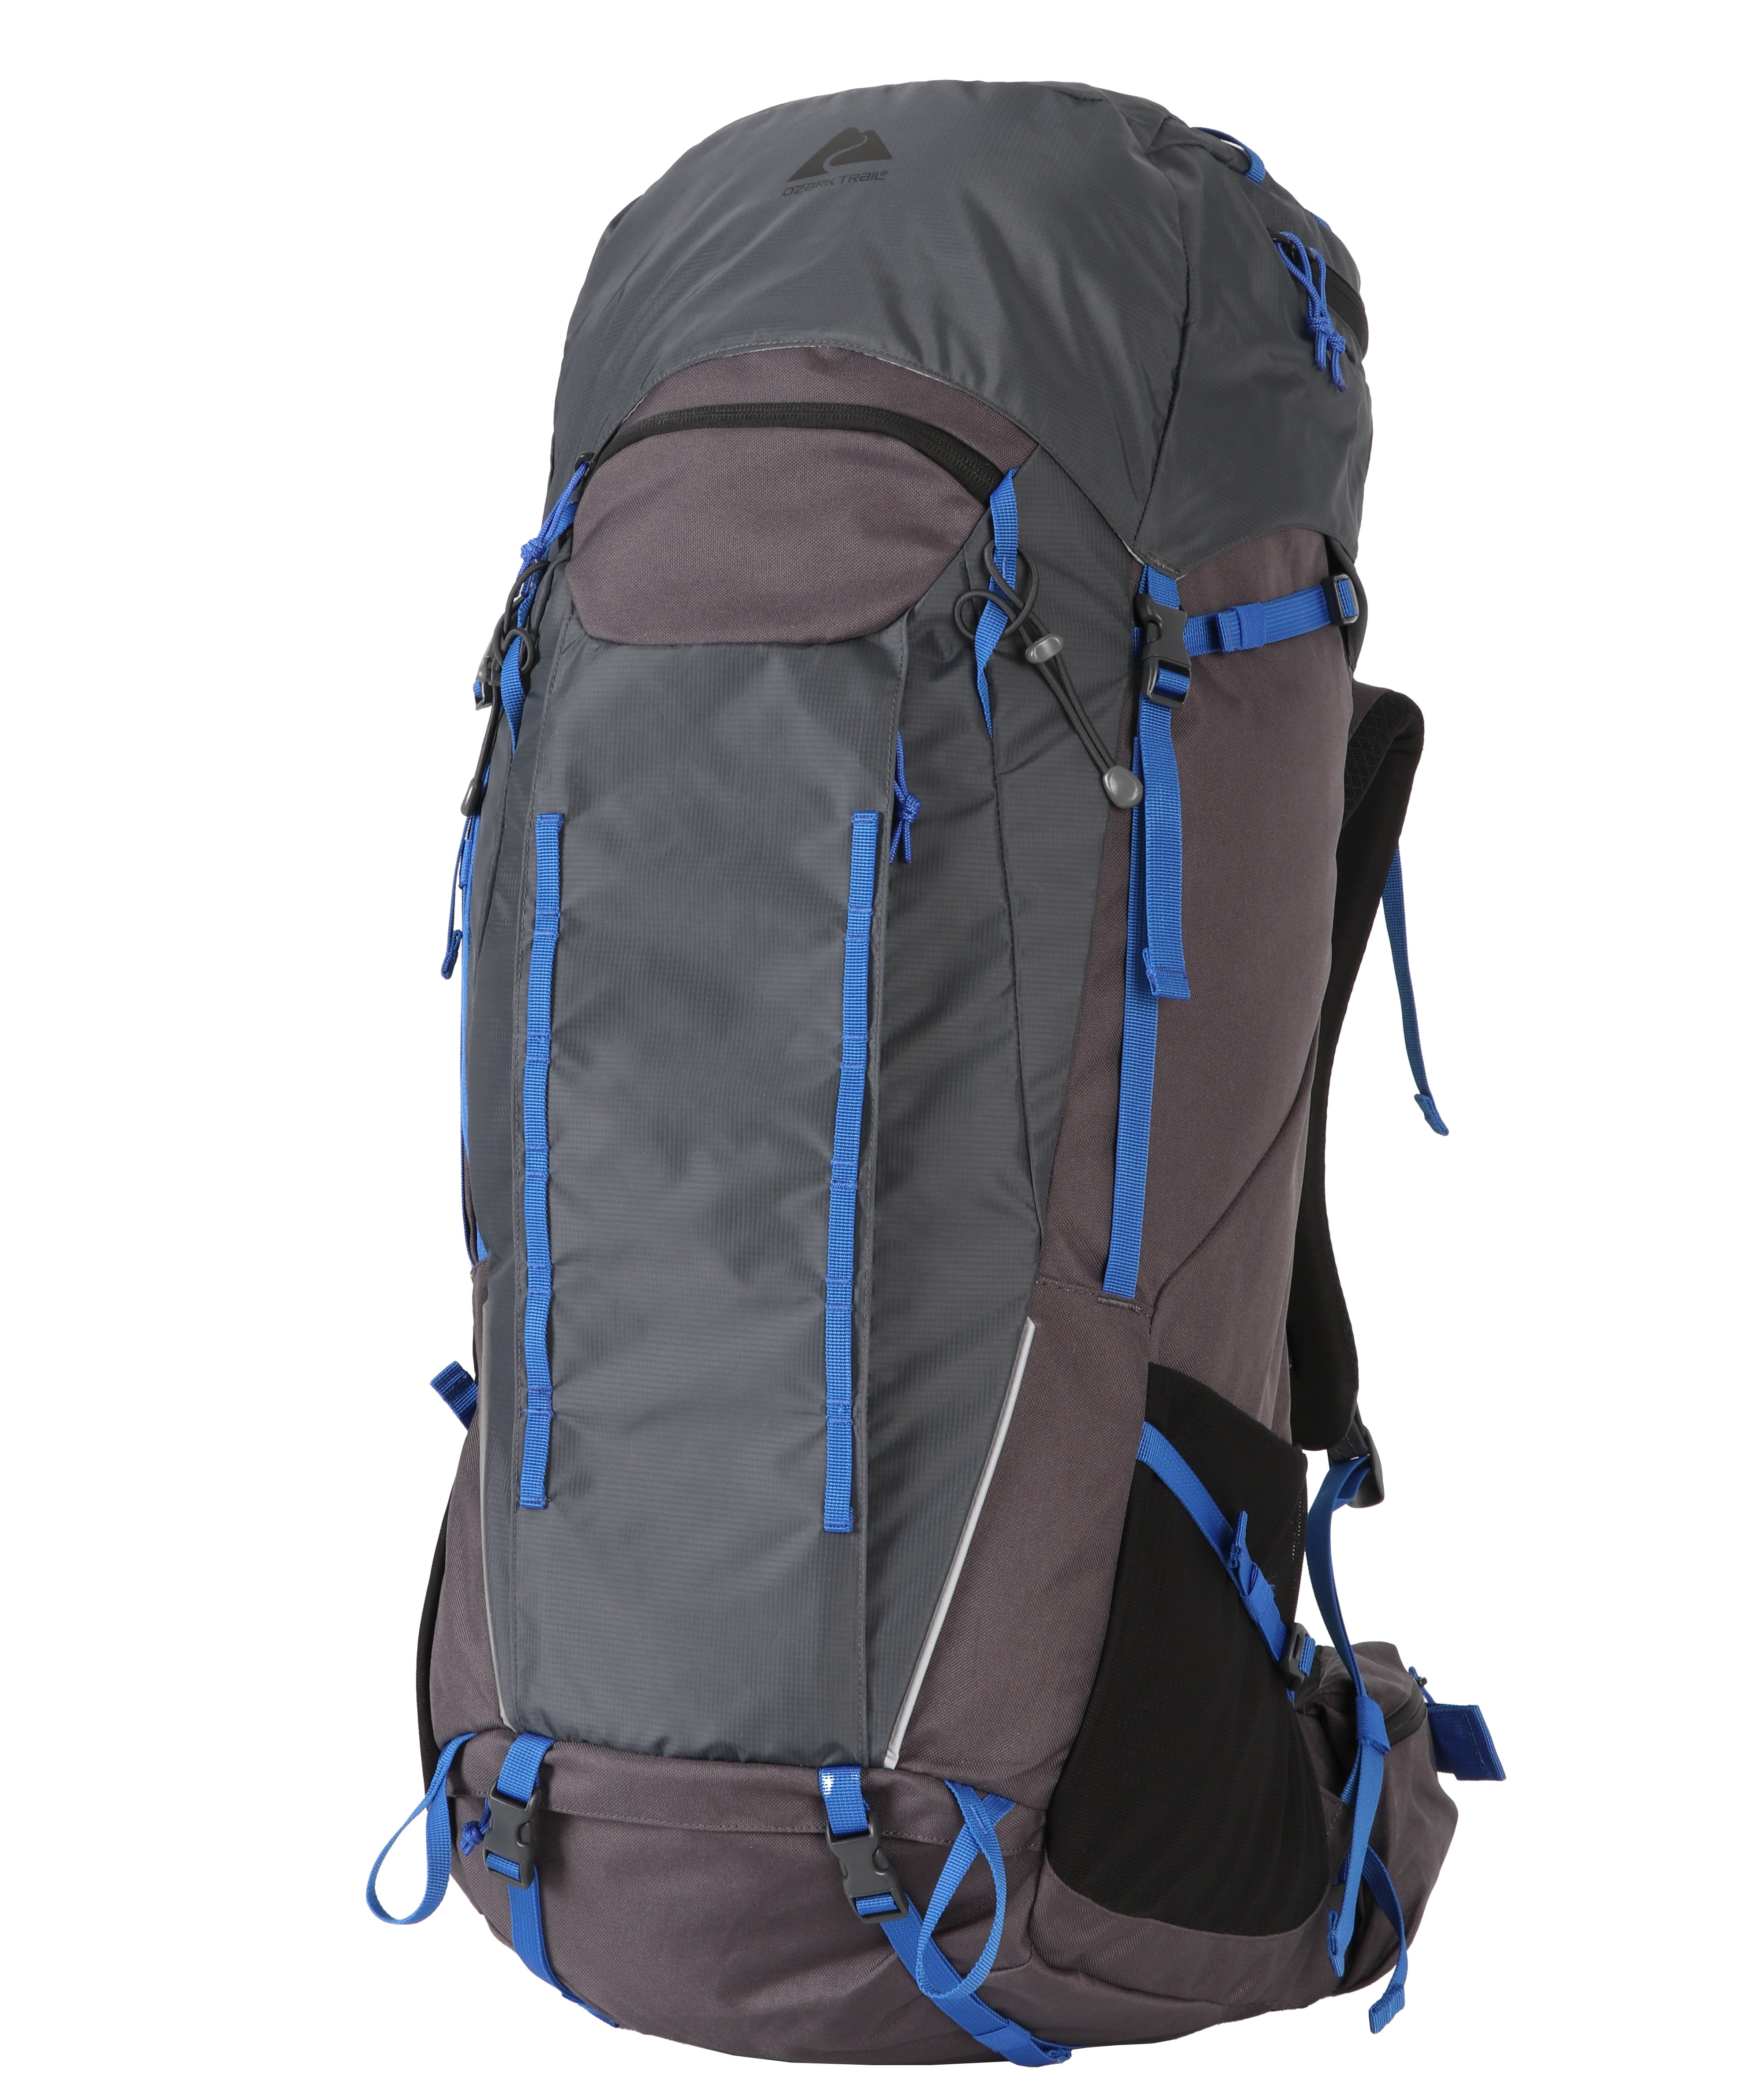 65 Litre Discovery Rucksack With Airmesh Back System Ideal For Travellers,Hiking 